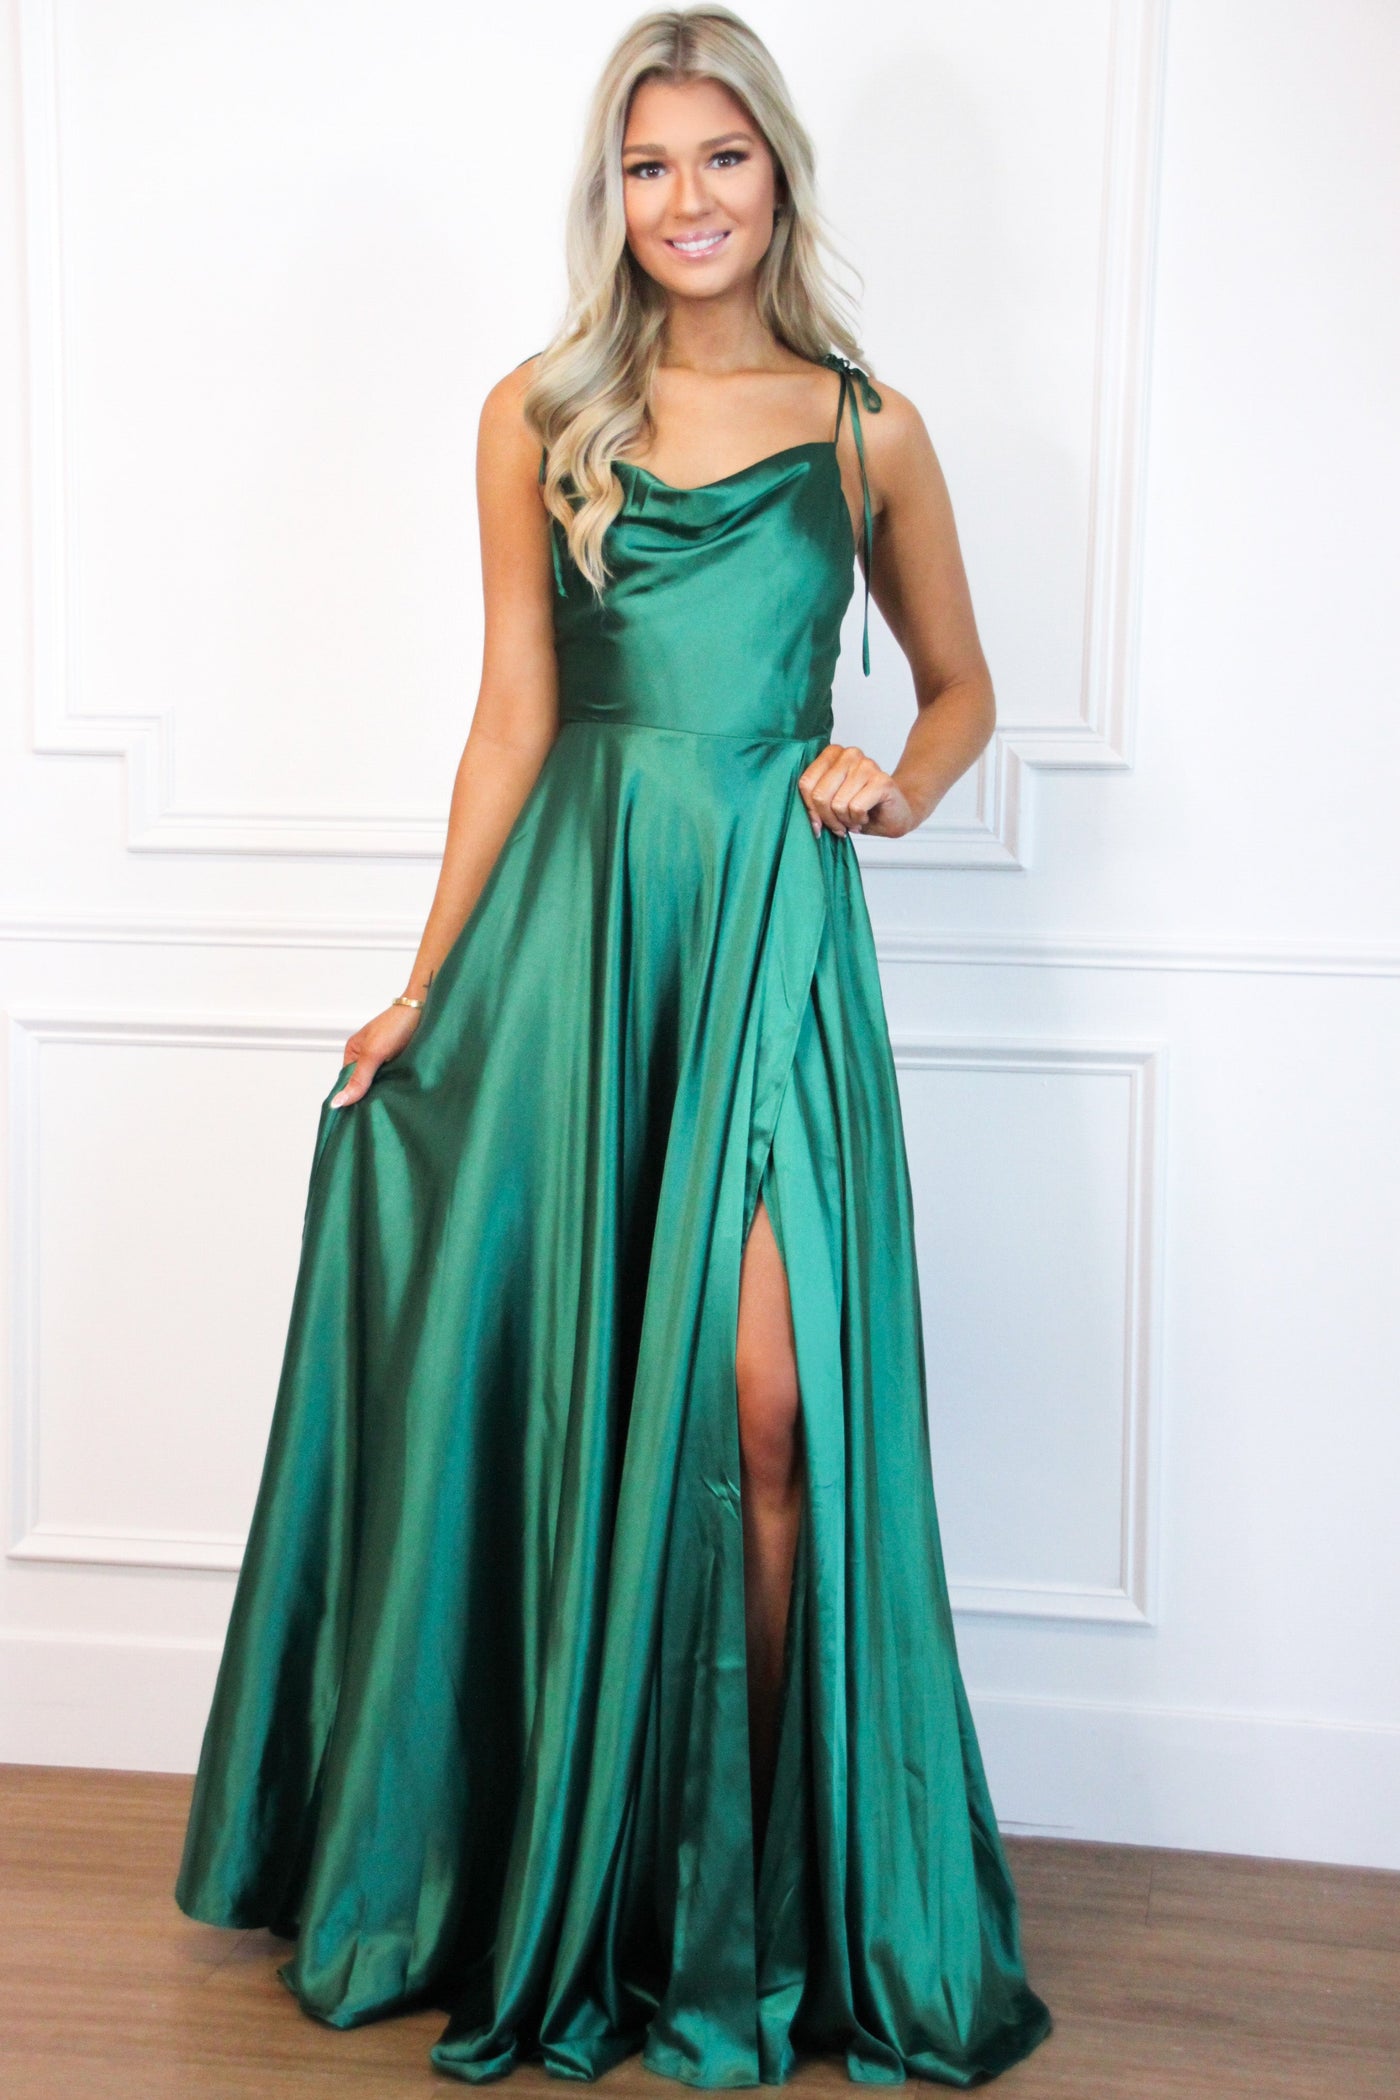 Tonight's the Night Satin Formal Dress: Rich Green - Bella and Bloom Boutique